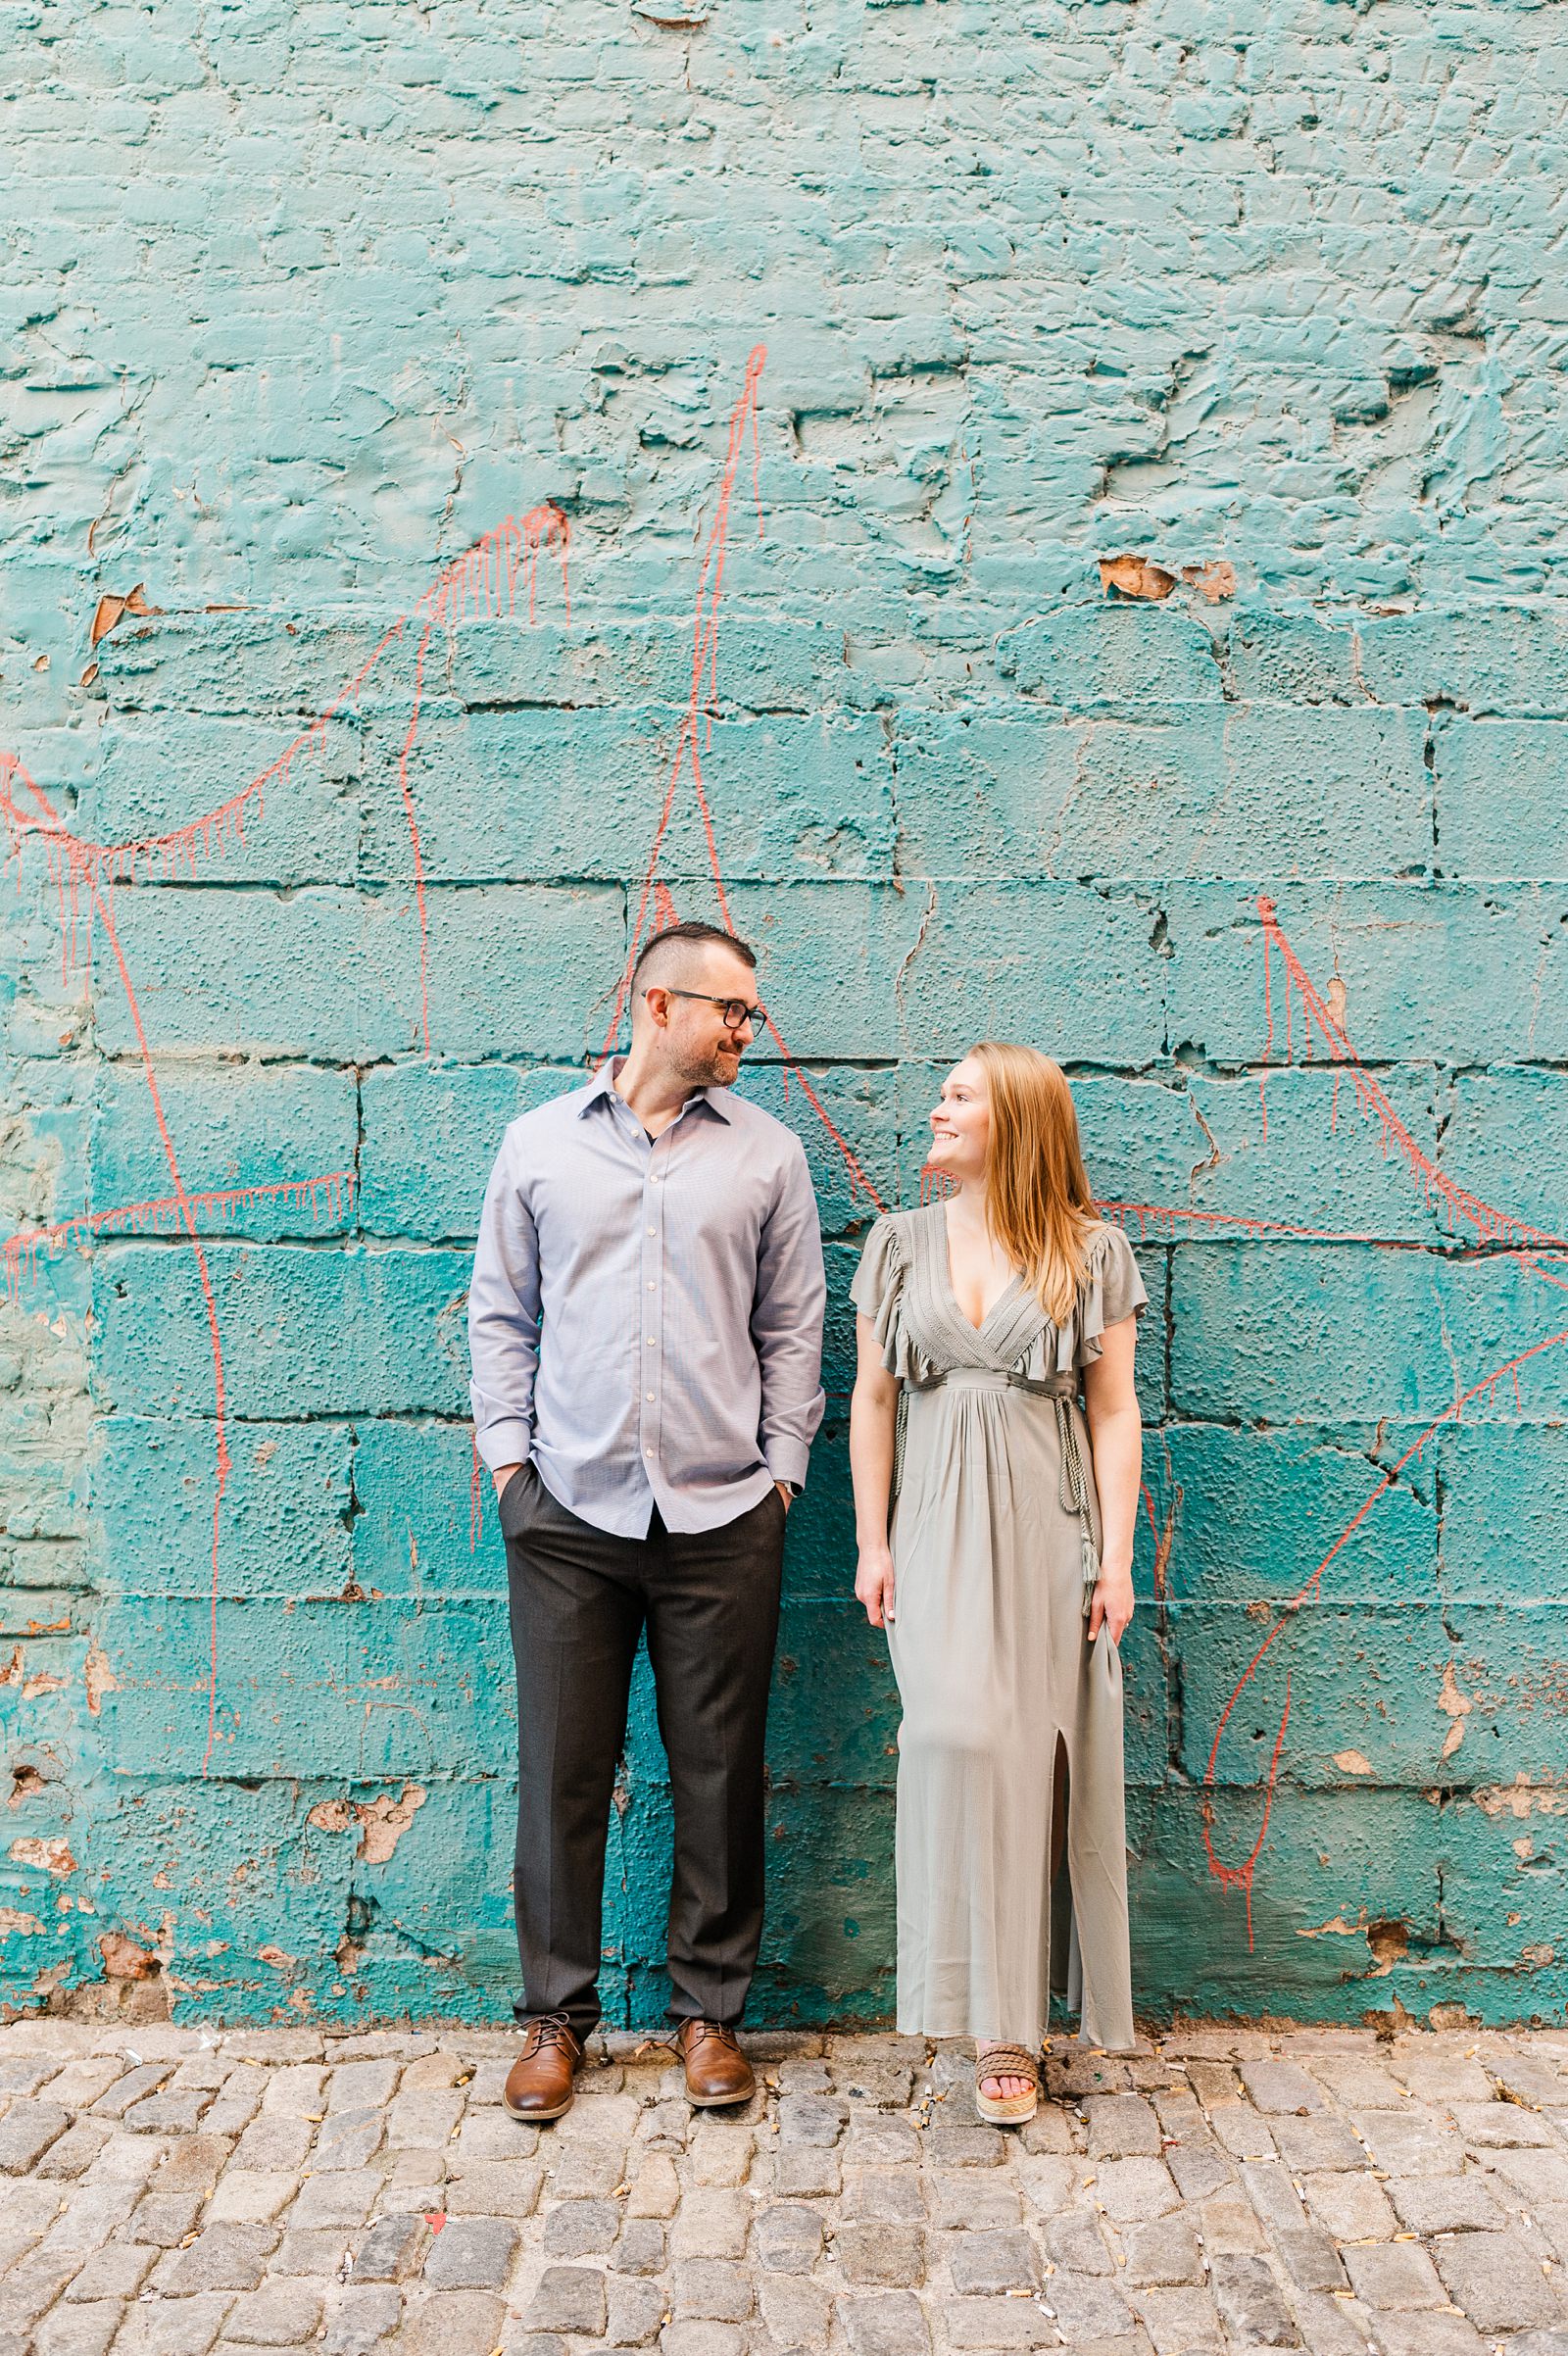 Downtown Richmond Engagement Session with Colorful Blue Wall by Urban Farmhouse. Wedding Photographer Kailey Brianne Photography